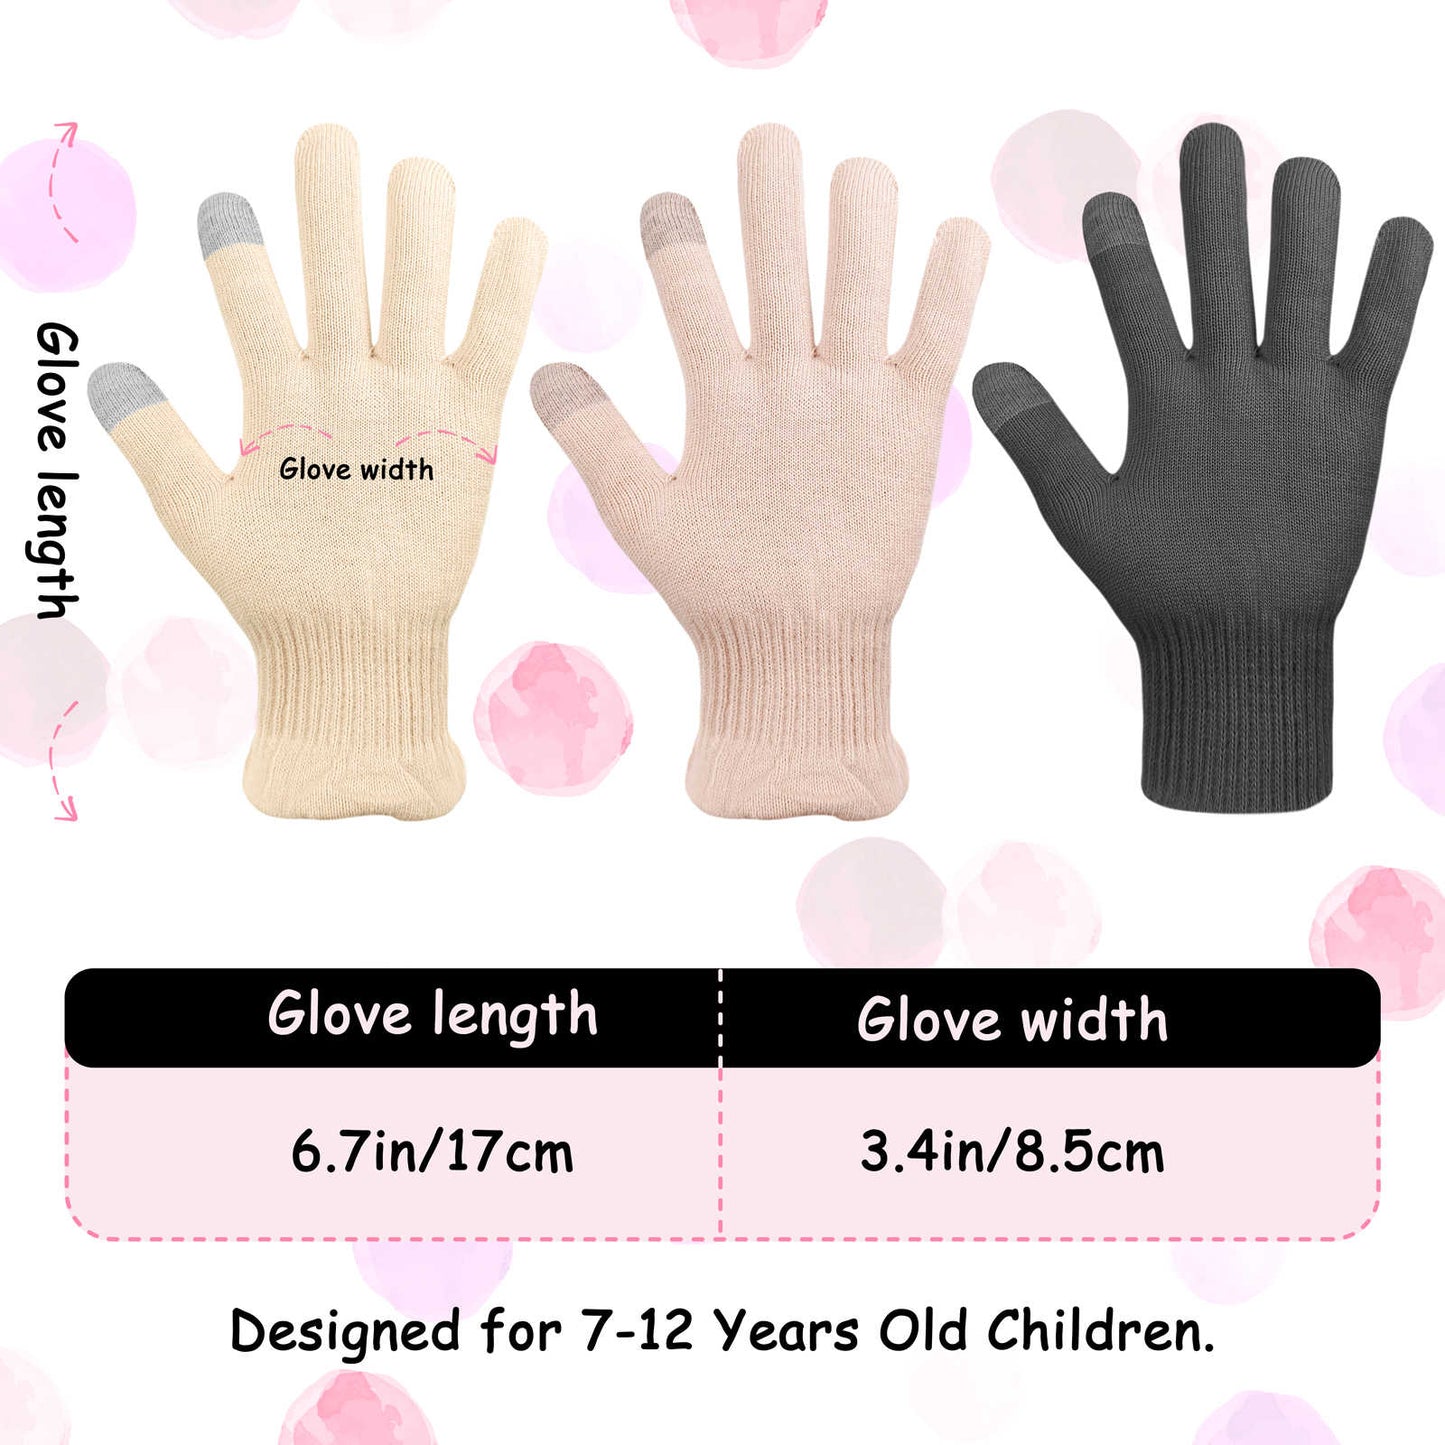 EvridWear Kid's Beauty Cotton Gloves with Touchscreen, Eczema, Dry Hands, Hand Care, Day and Night Moisturizing,(2 Pairs)